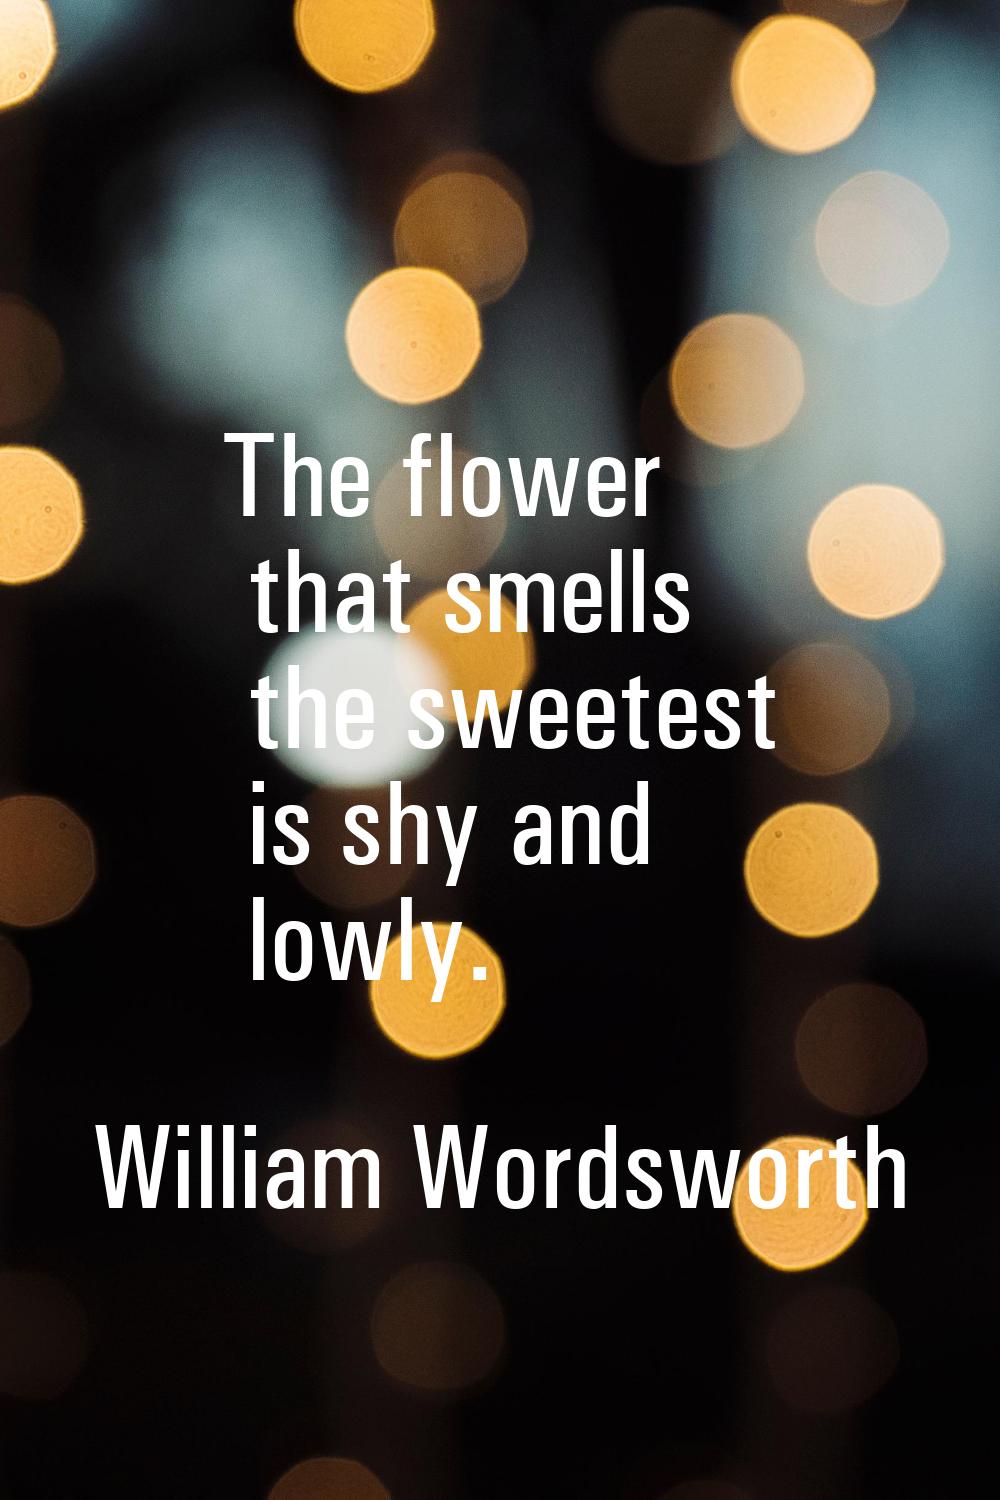 The flower that smells the sweetest is shy and lowly.